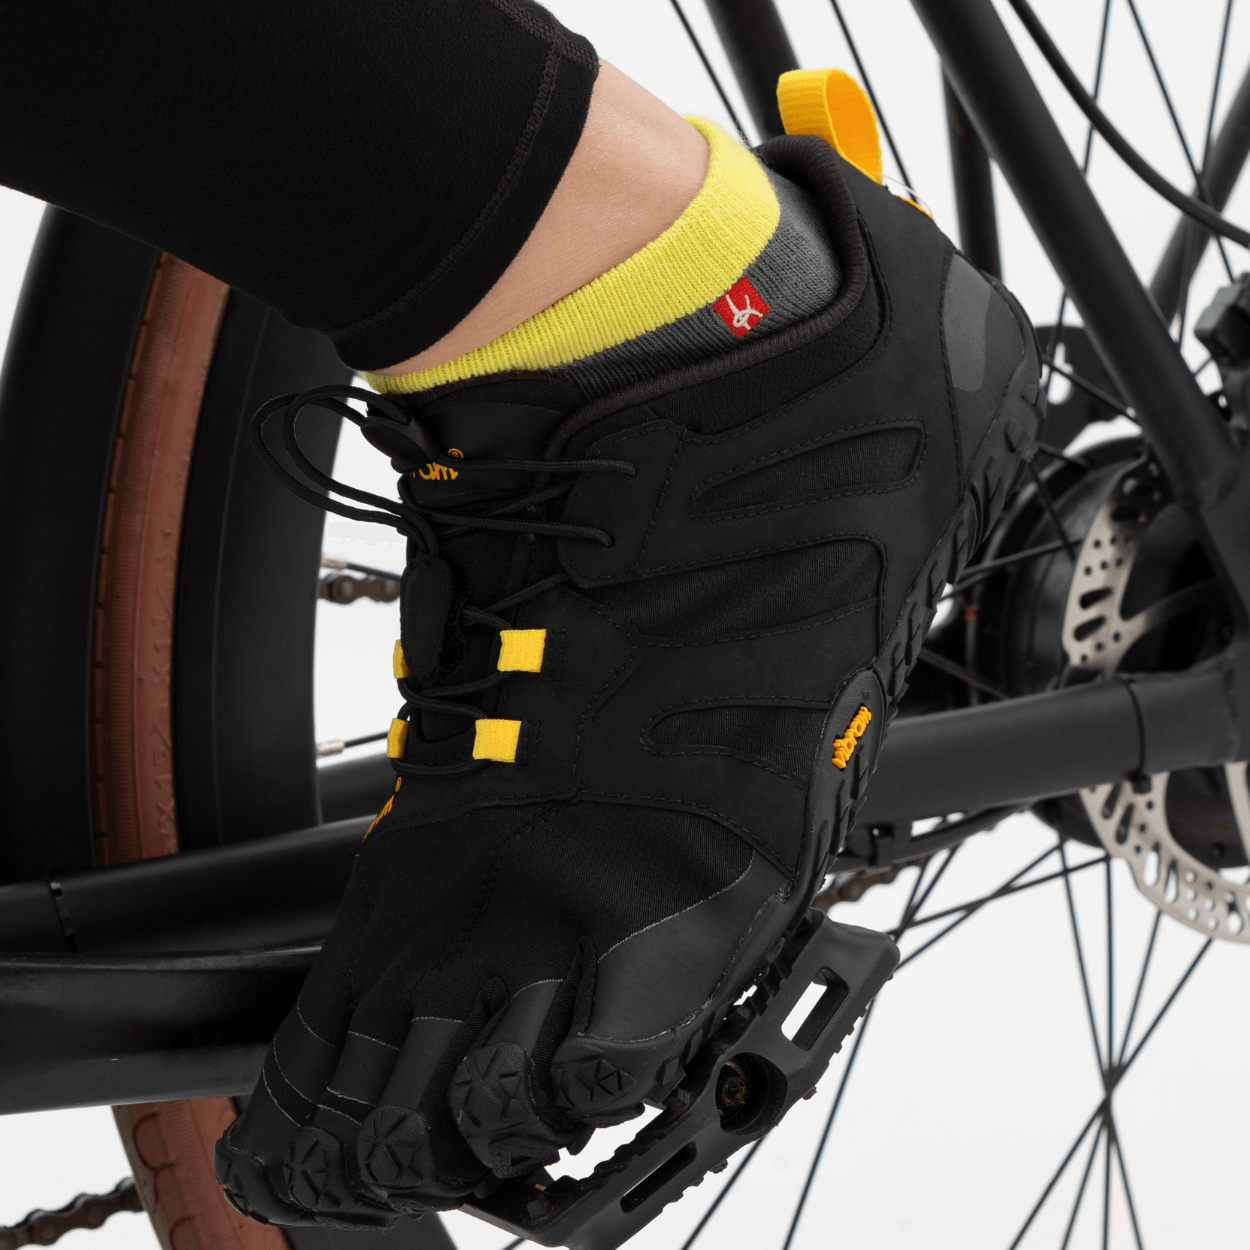 Lightweight toe socks for sport and leisure, ideal for cycling